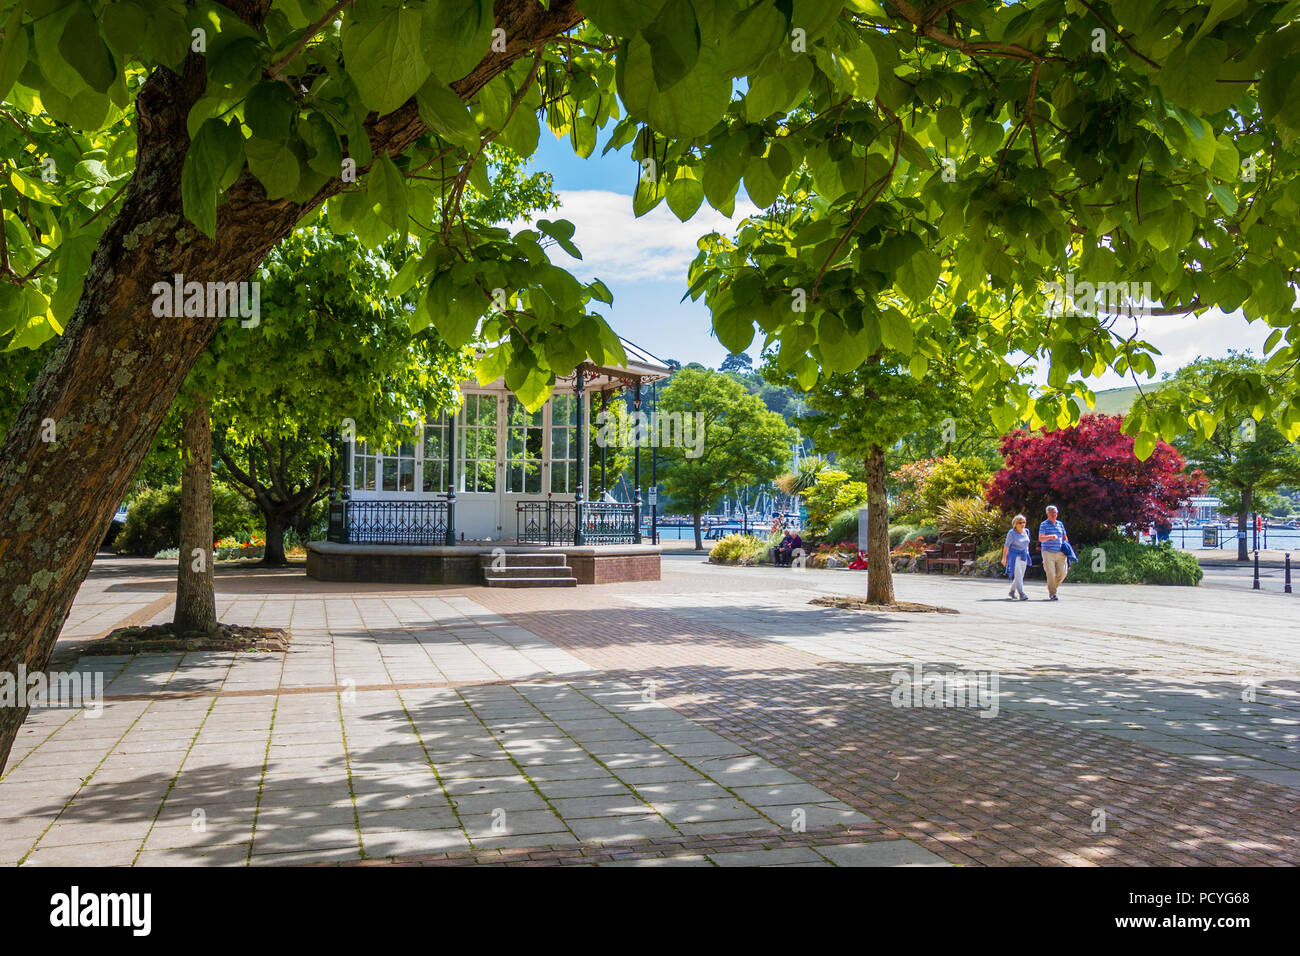 A view of the bandstand in The Royal Avenue Gardens, framed by a branch and trunk of an Indian Bean Tree in Dartmouth in South Devon, UK. Stock Photo